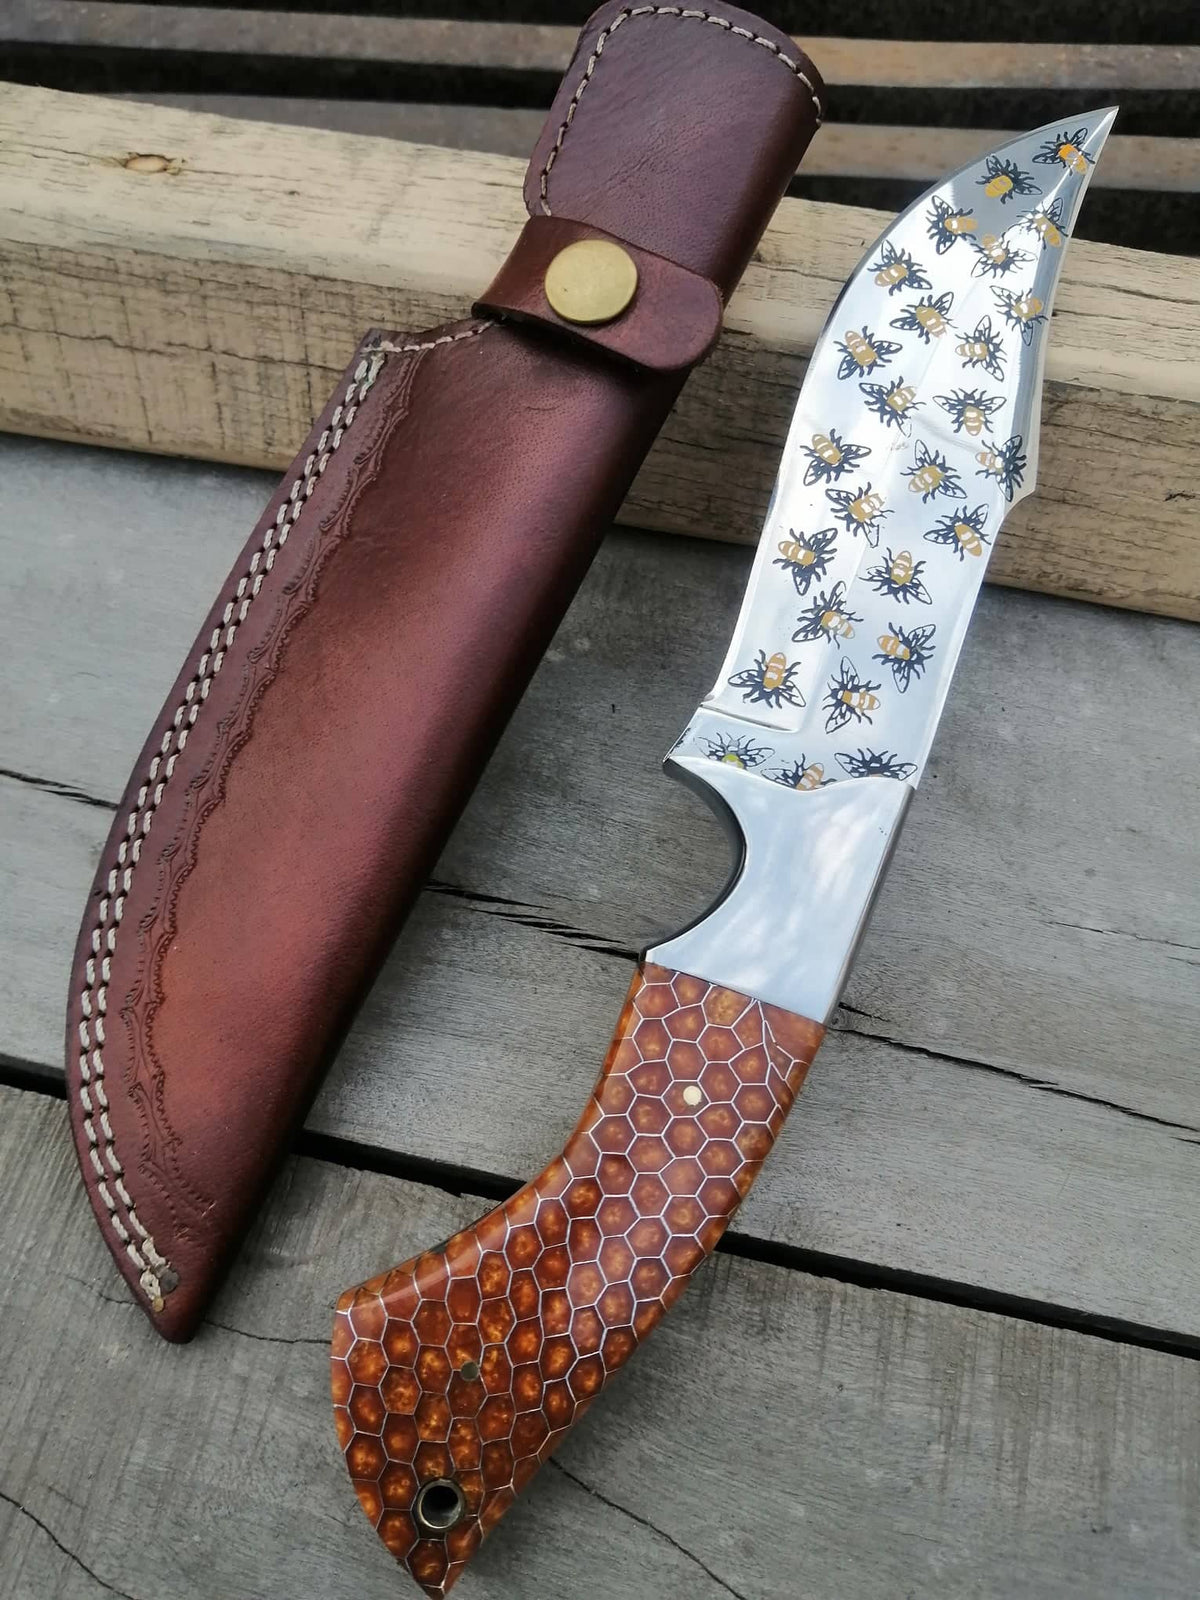 Blade Smith - Custom Made Hunting Knife with Bees